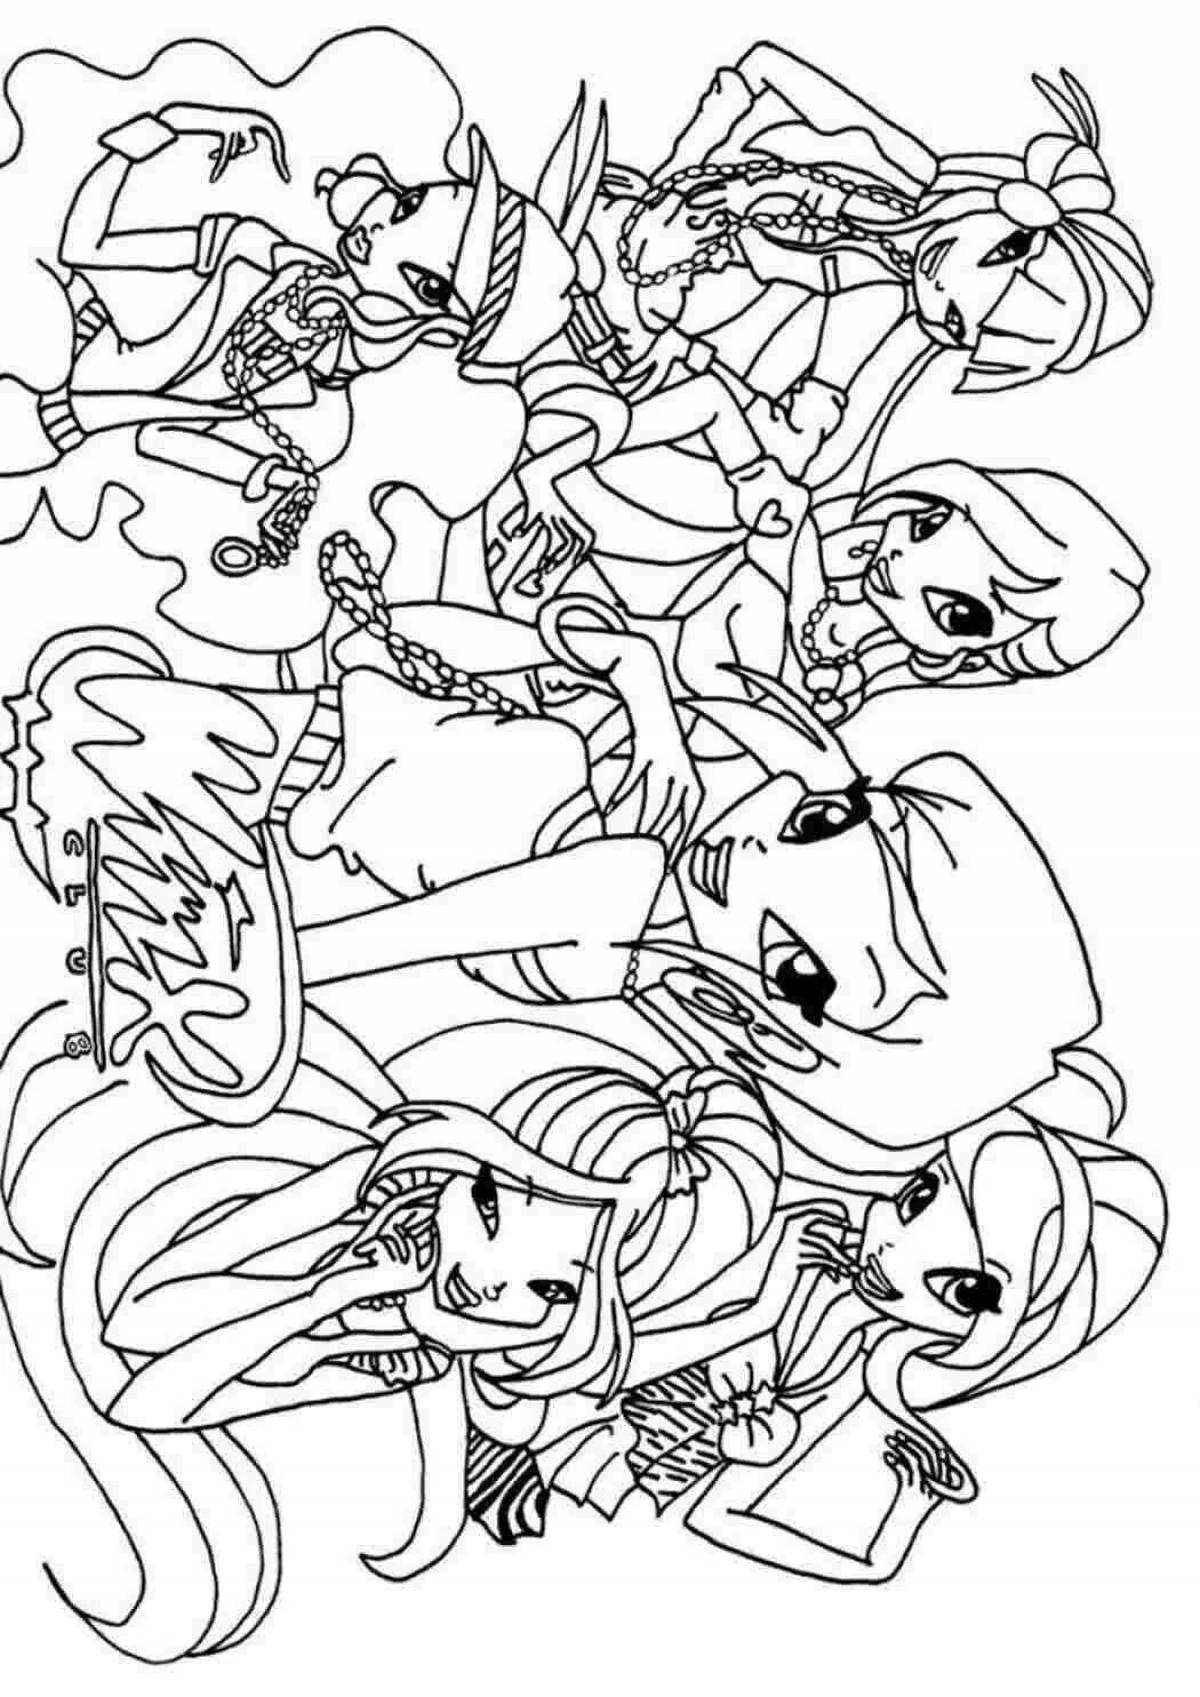 Animated winx comics coloring page